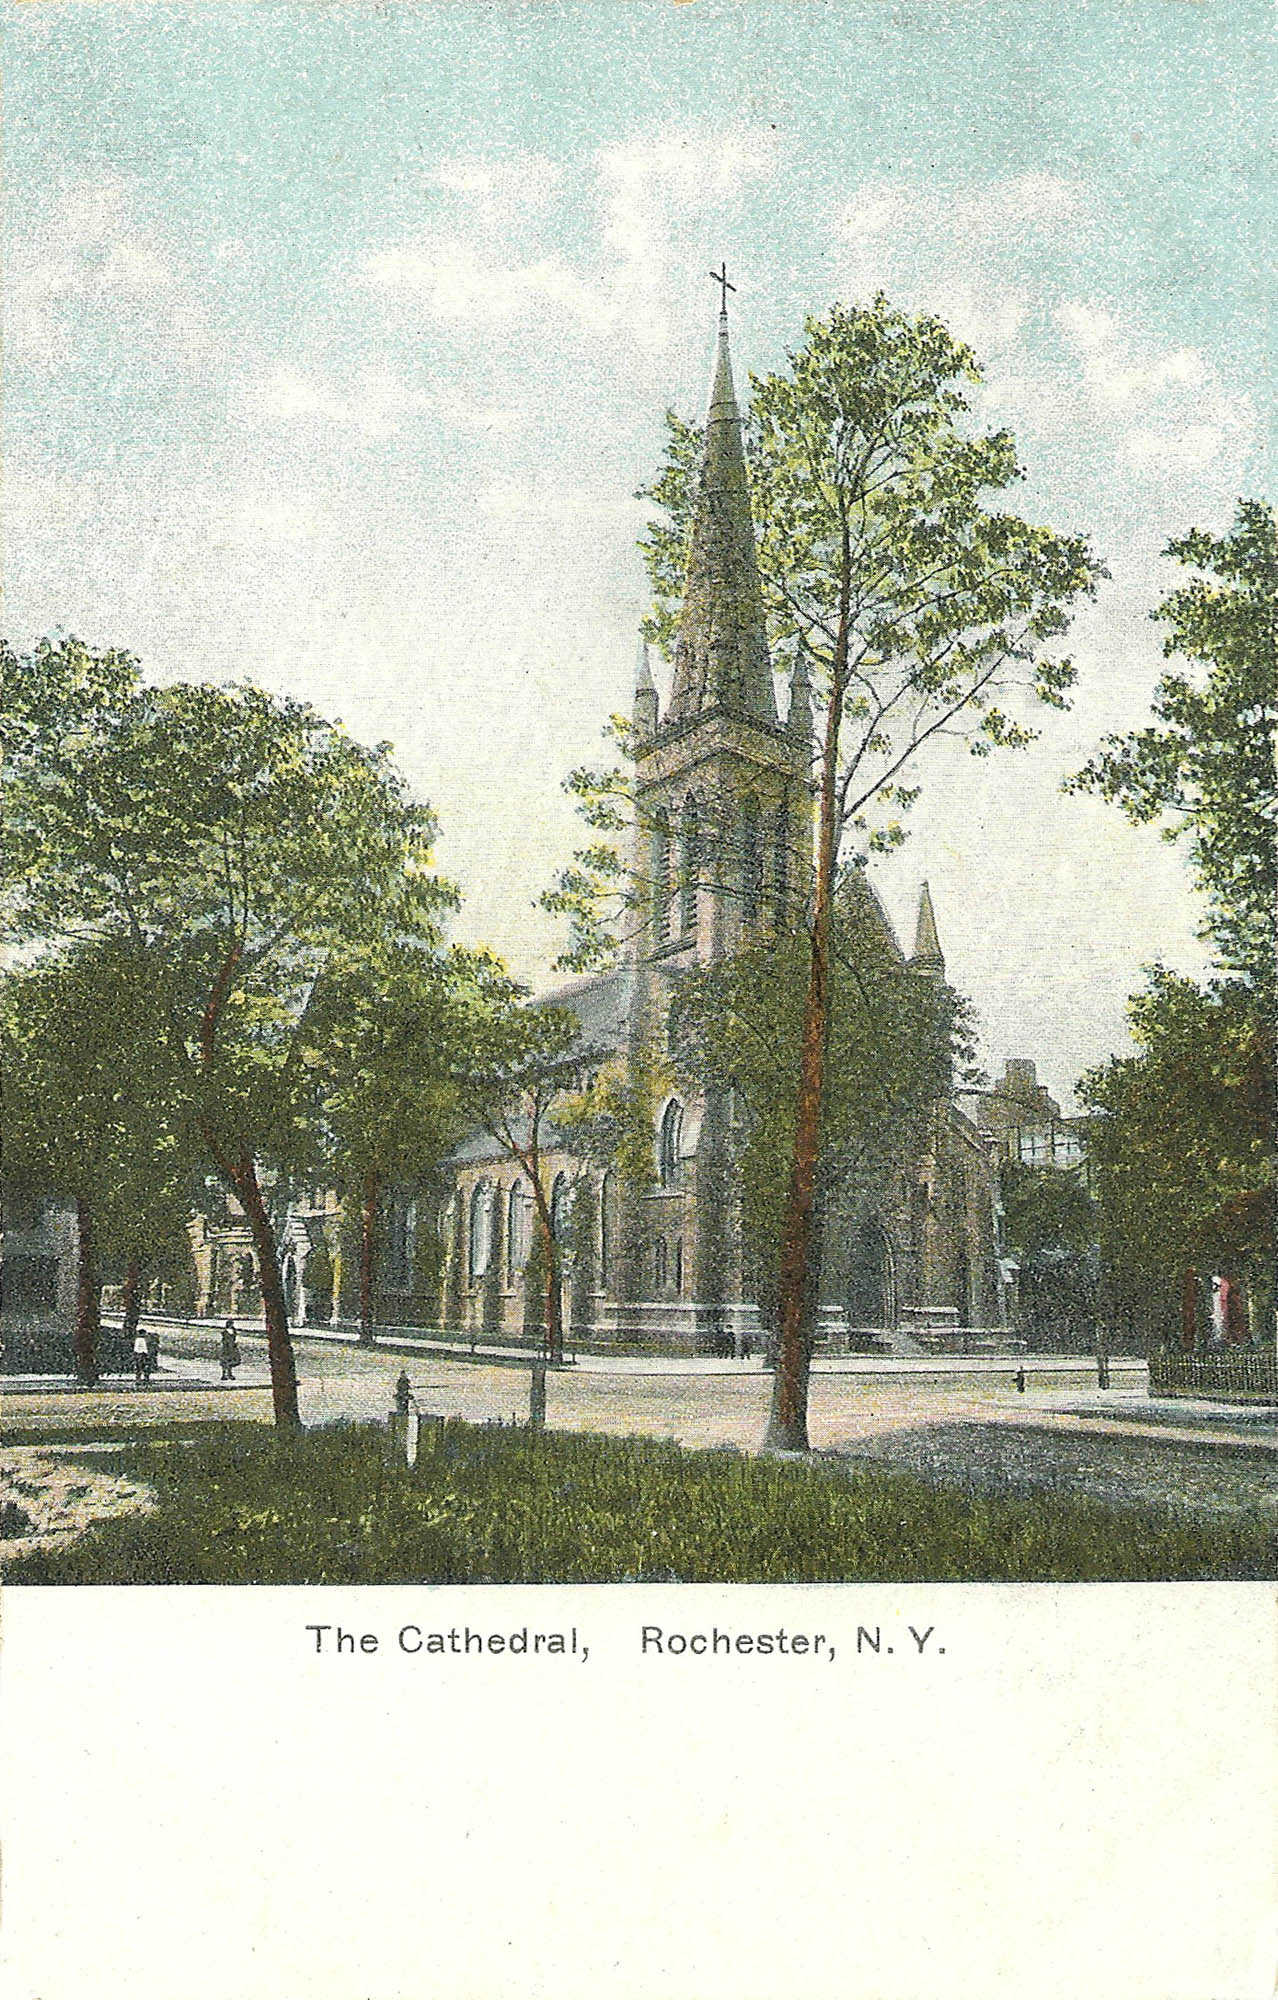 St. Patrick's Cathedral (#2), Rochester